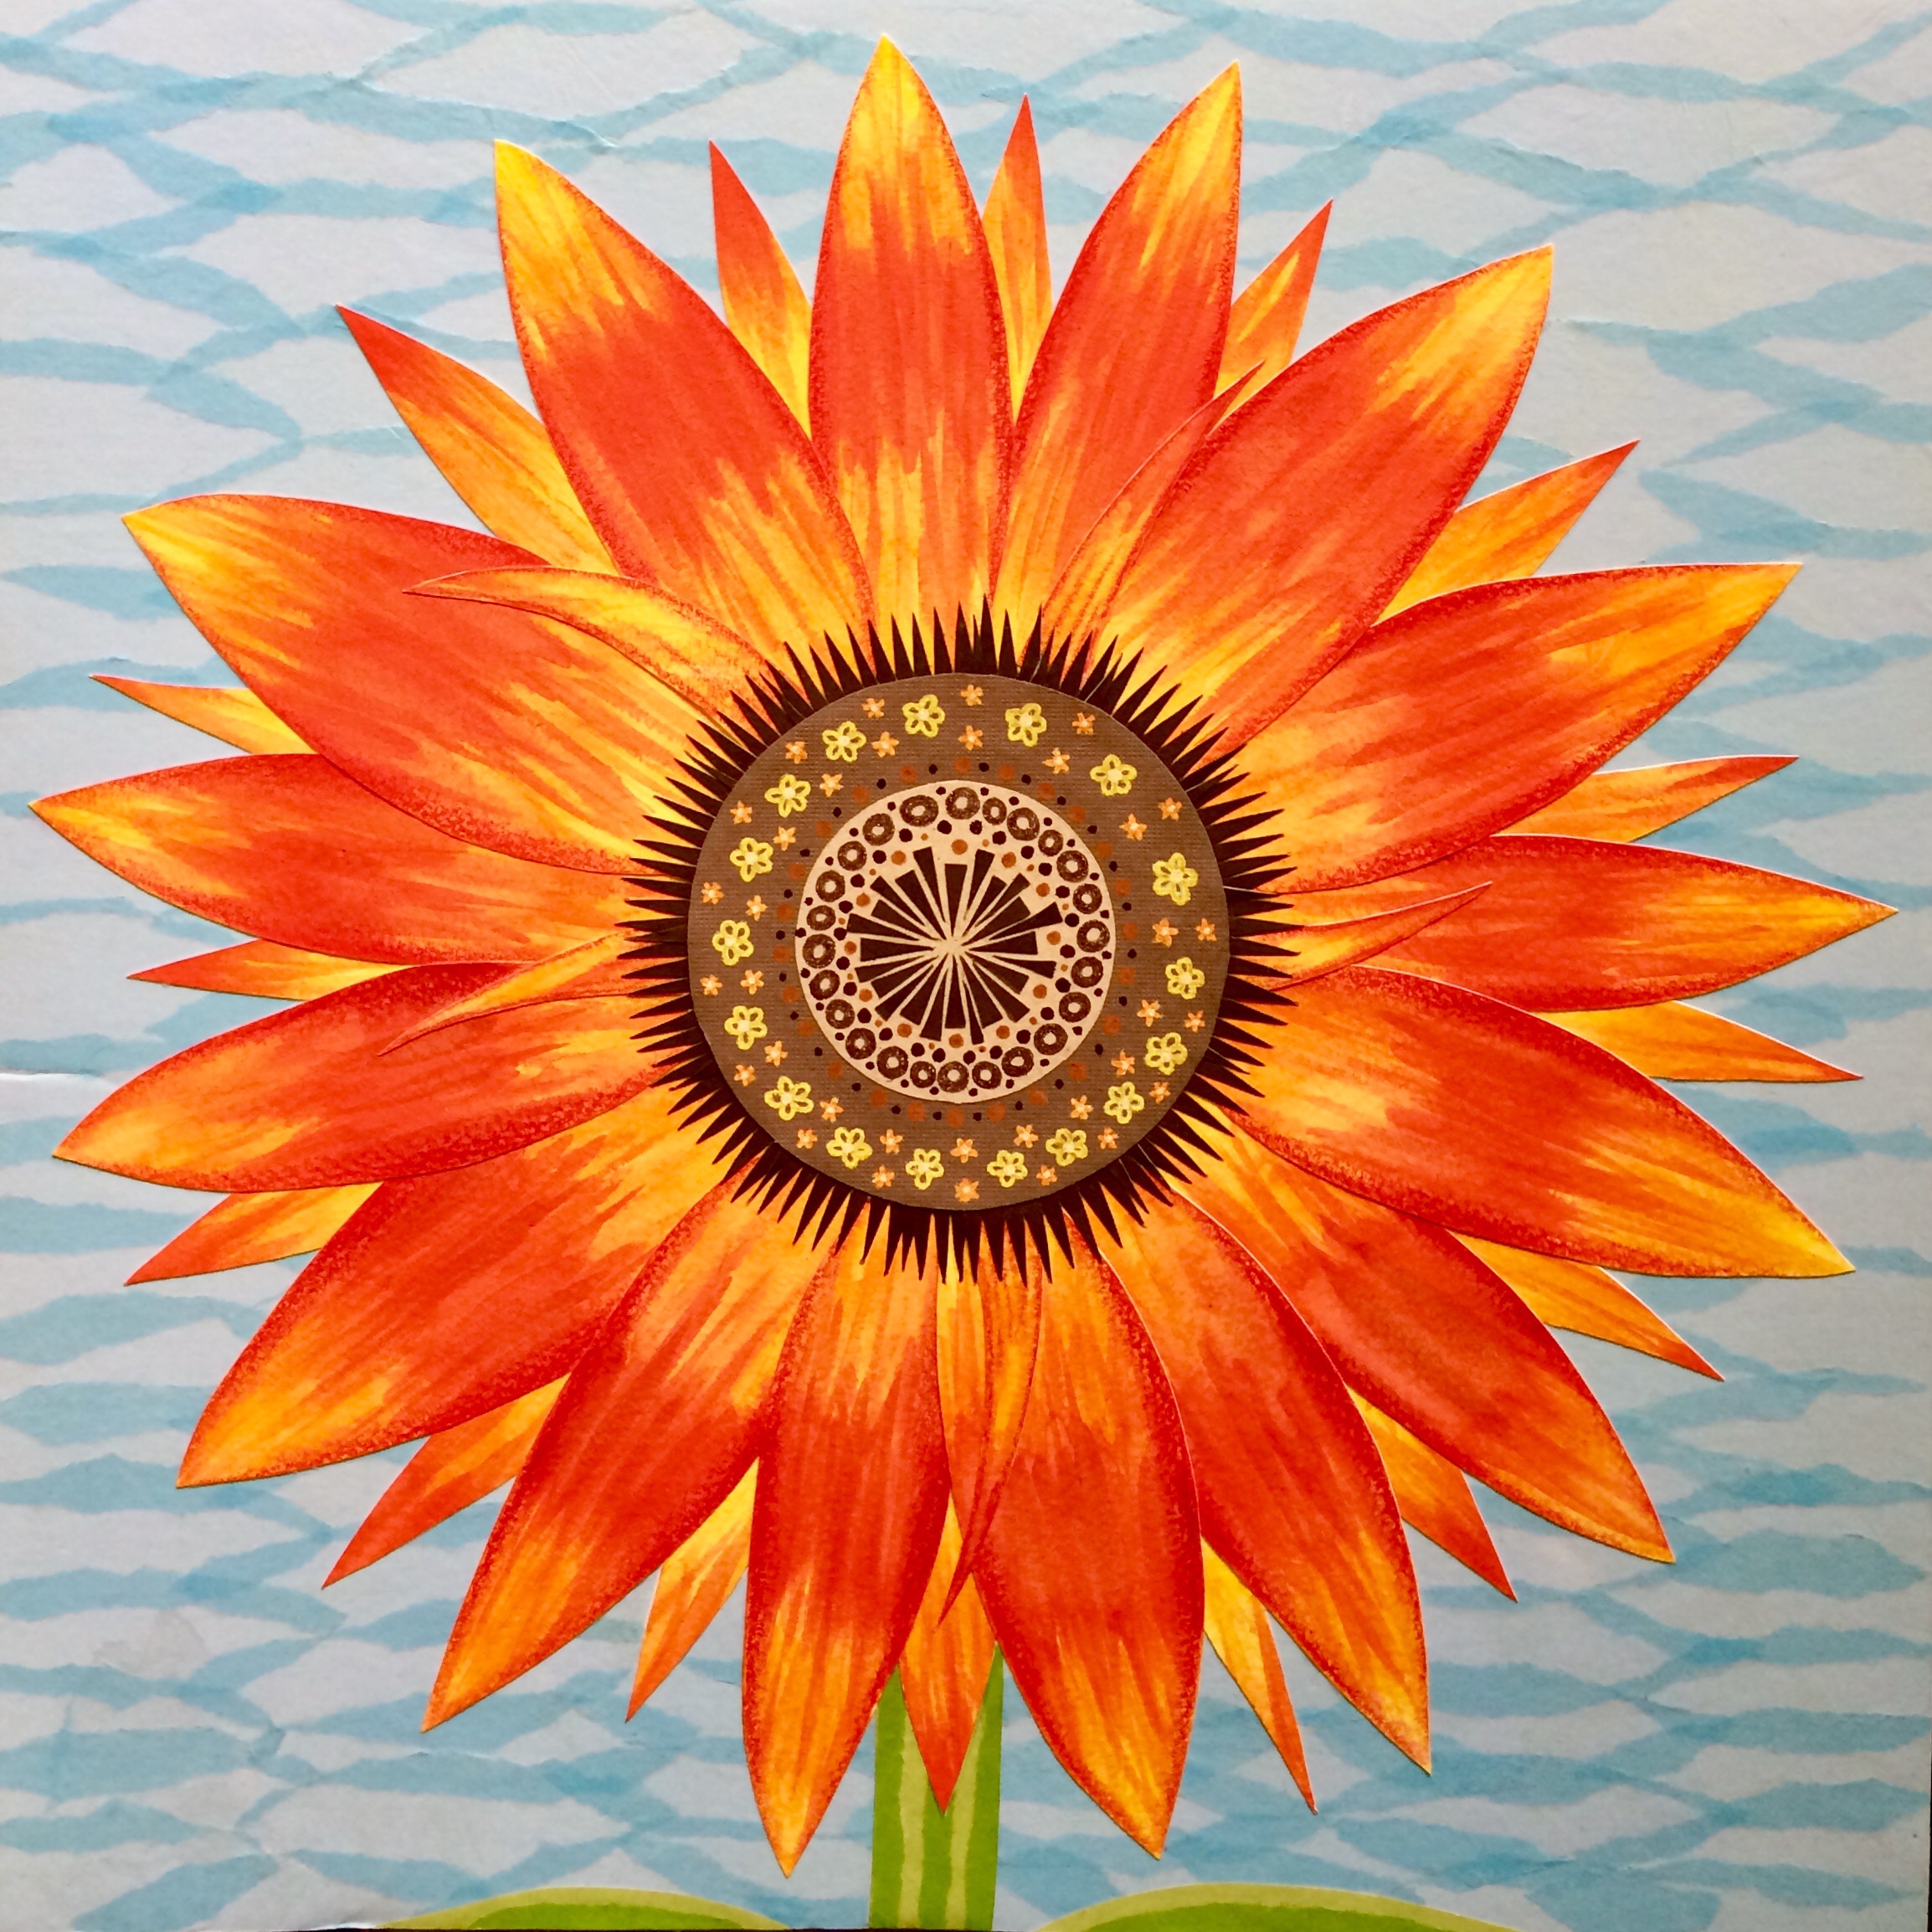 “Sunflower Study”, mixed media collage by Shalom Schultz